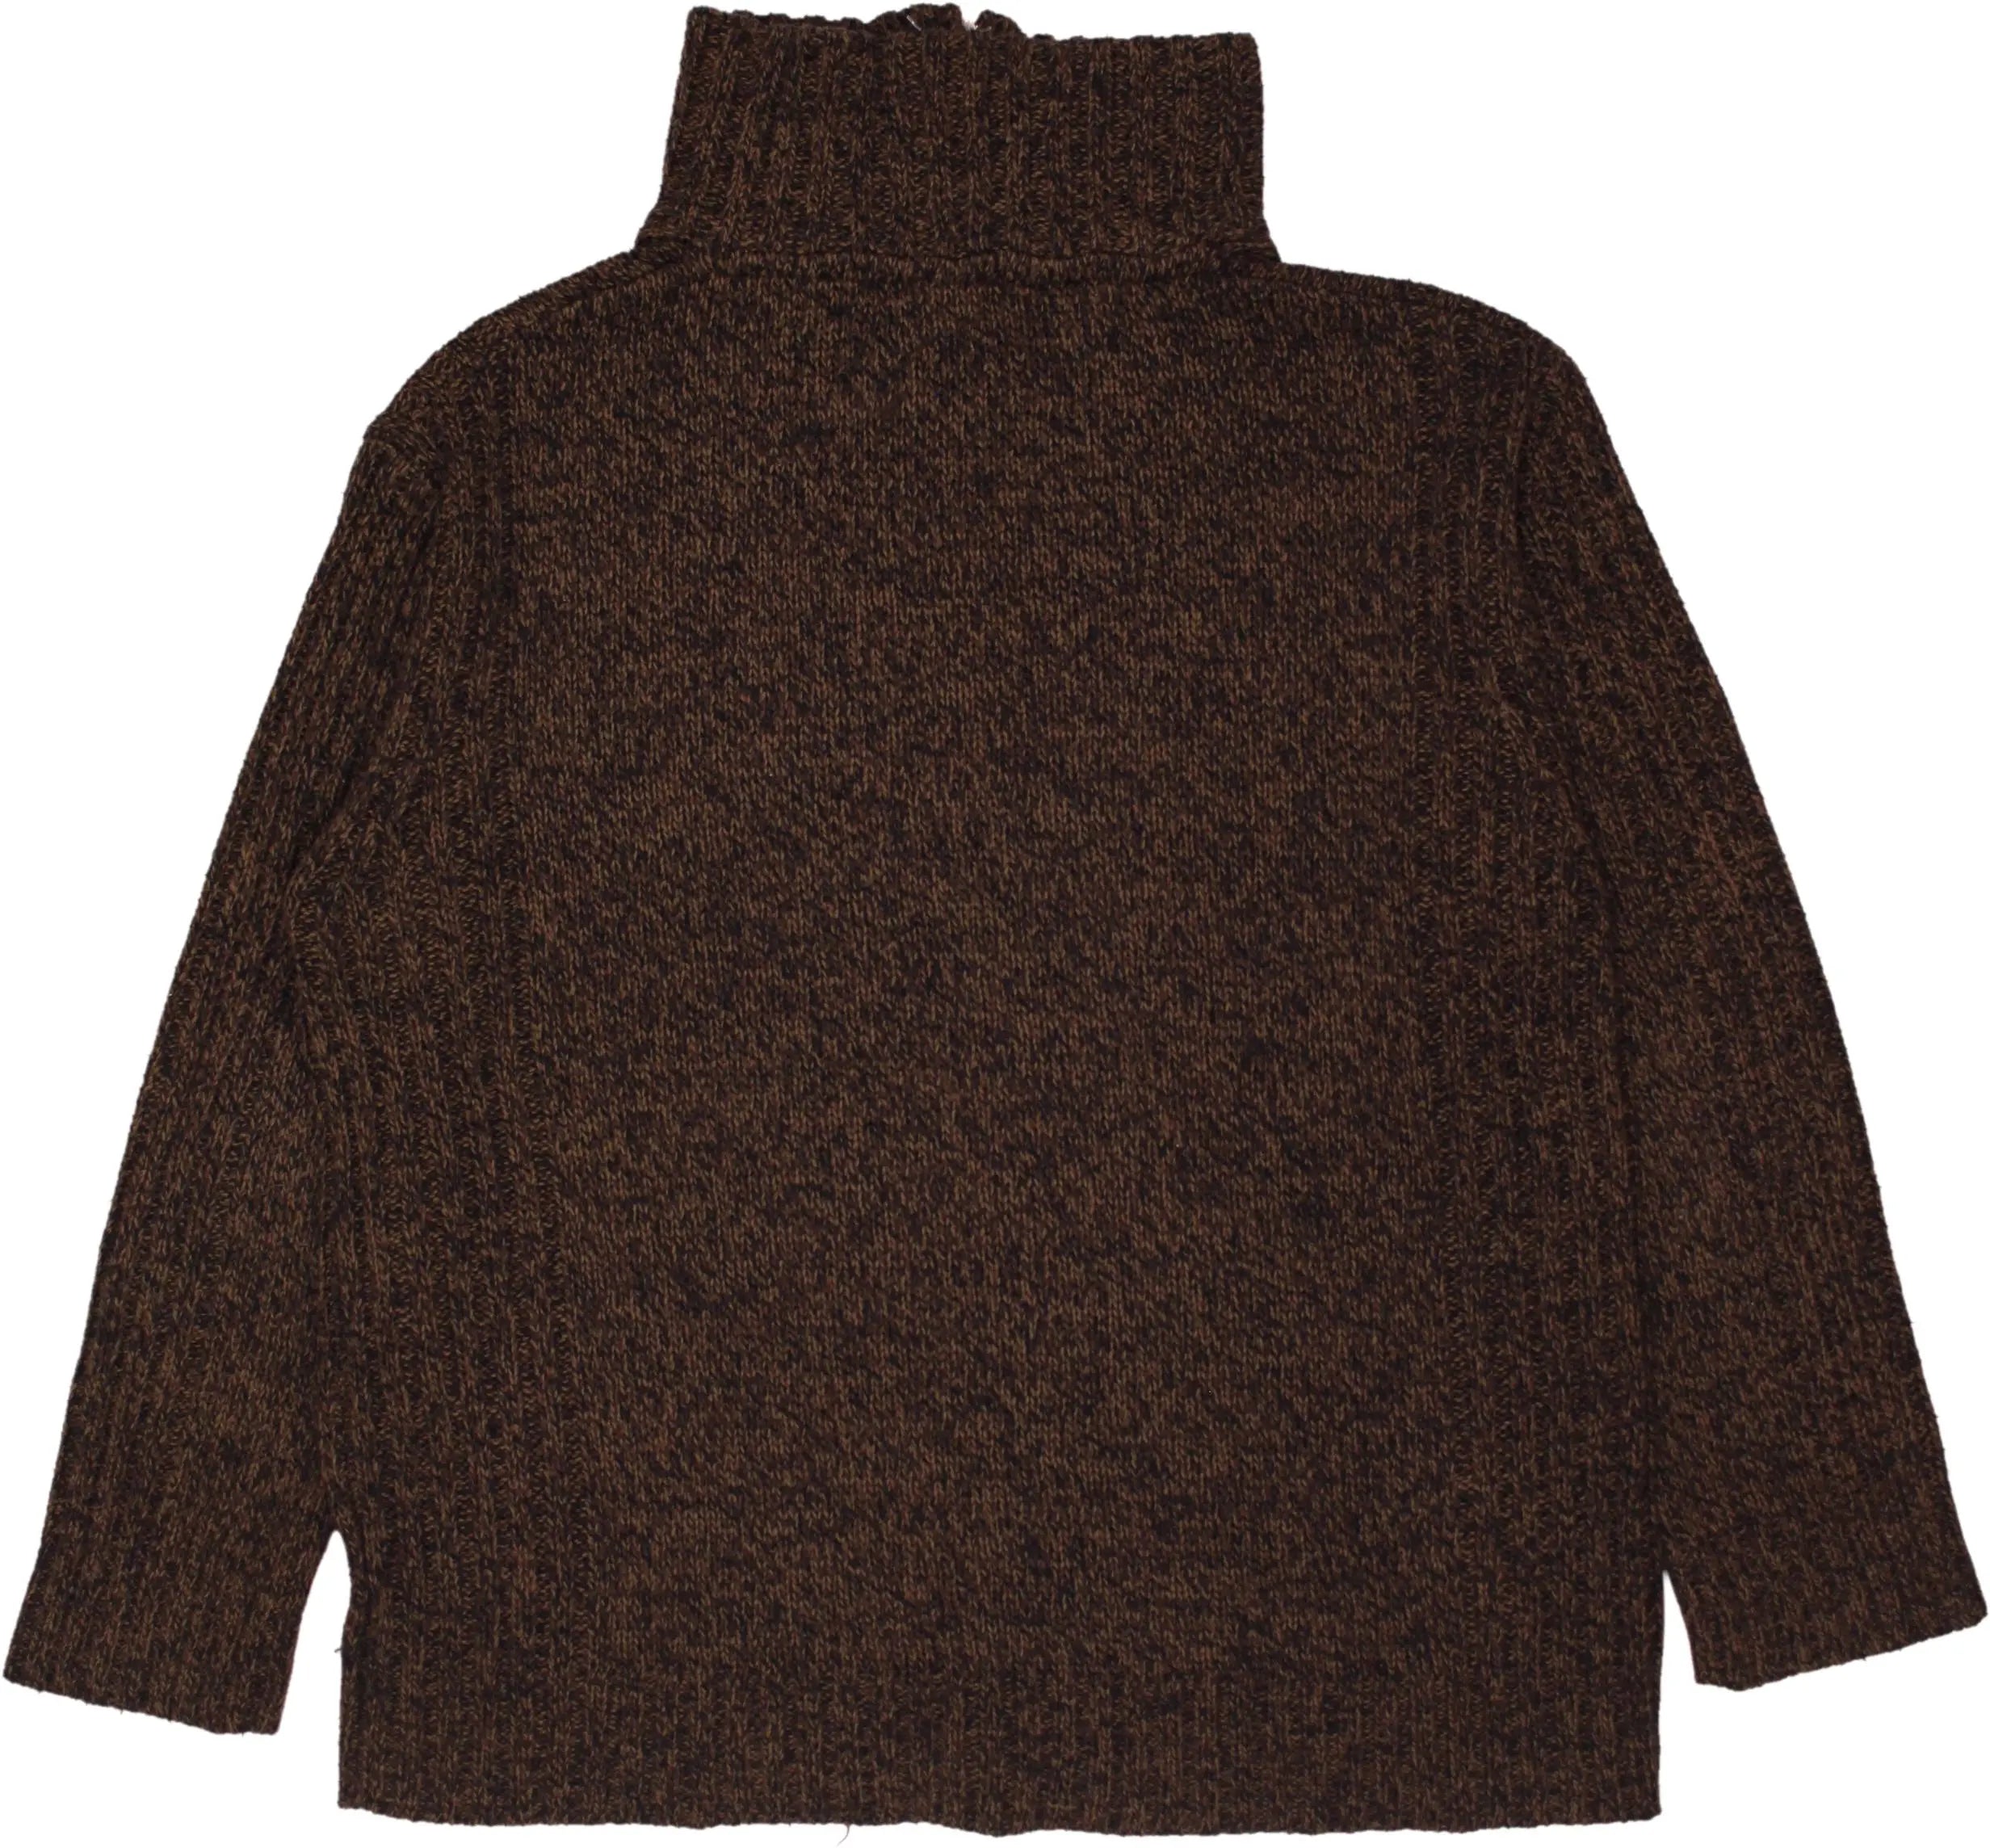 NFG Industries - Brown Knitted Sweater- ThriftTale.com - Vintage and second handclothing